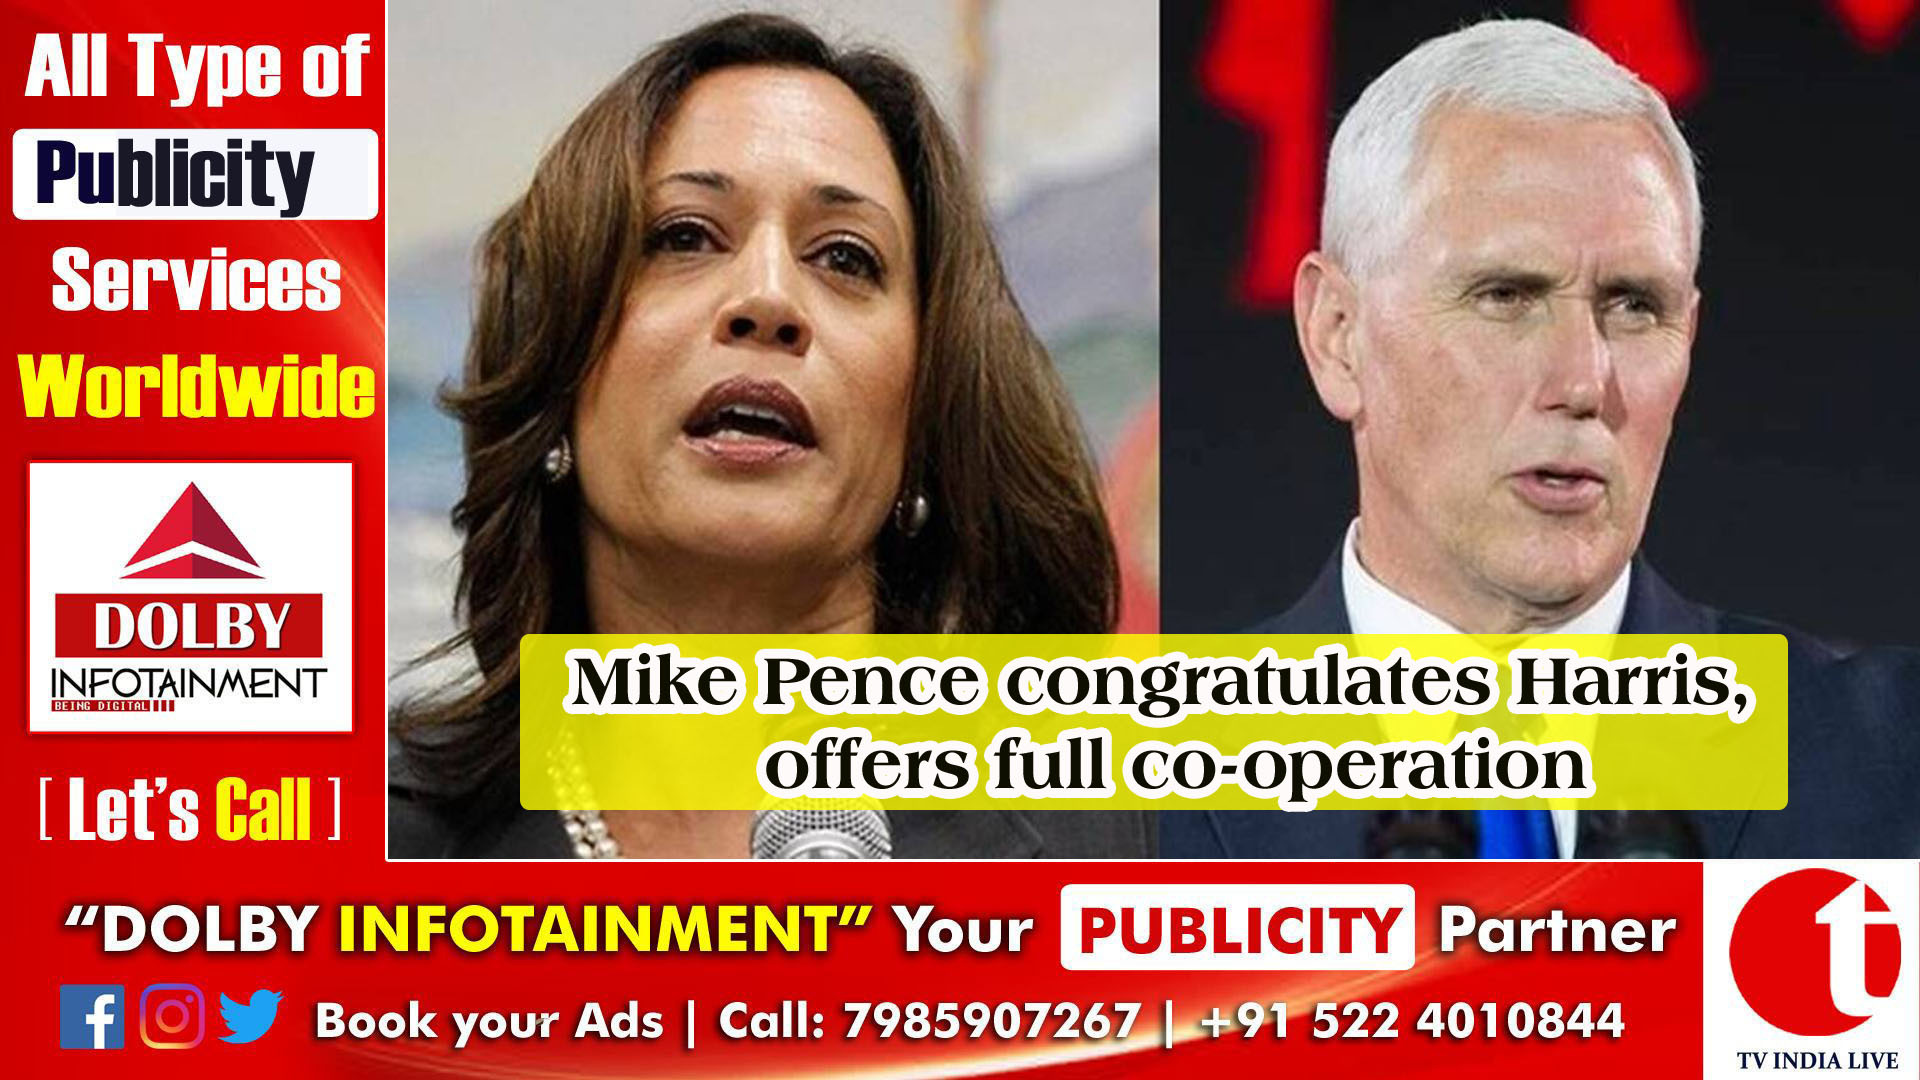 Mike Pence congratulates Harris, offers full co-operation